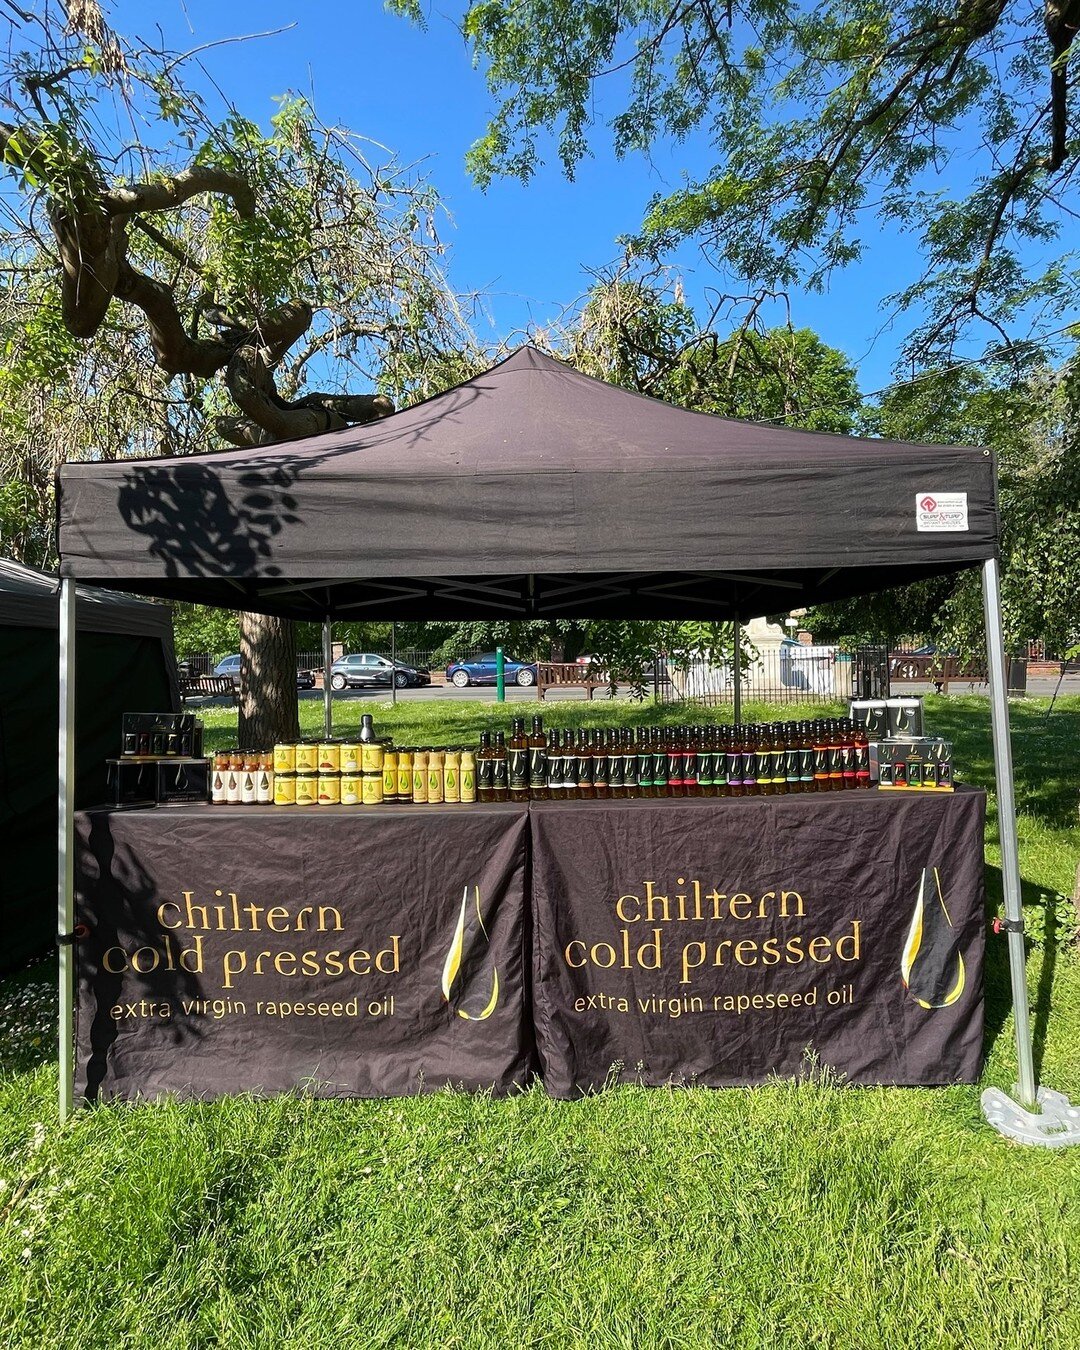 Farmer's Market filled weekend ahead! 🍓🥖👩&zwj;🌾

Come &amp; see us at Beaconsfield Farmers Market Thames Valley Farmers' Market Co-operative on Saturday morning to stock up on your Chiltern oil must haves, along with lots of other delicious treat